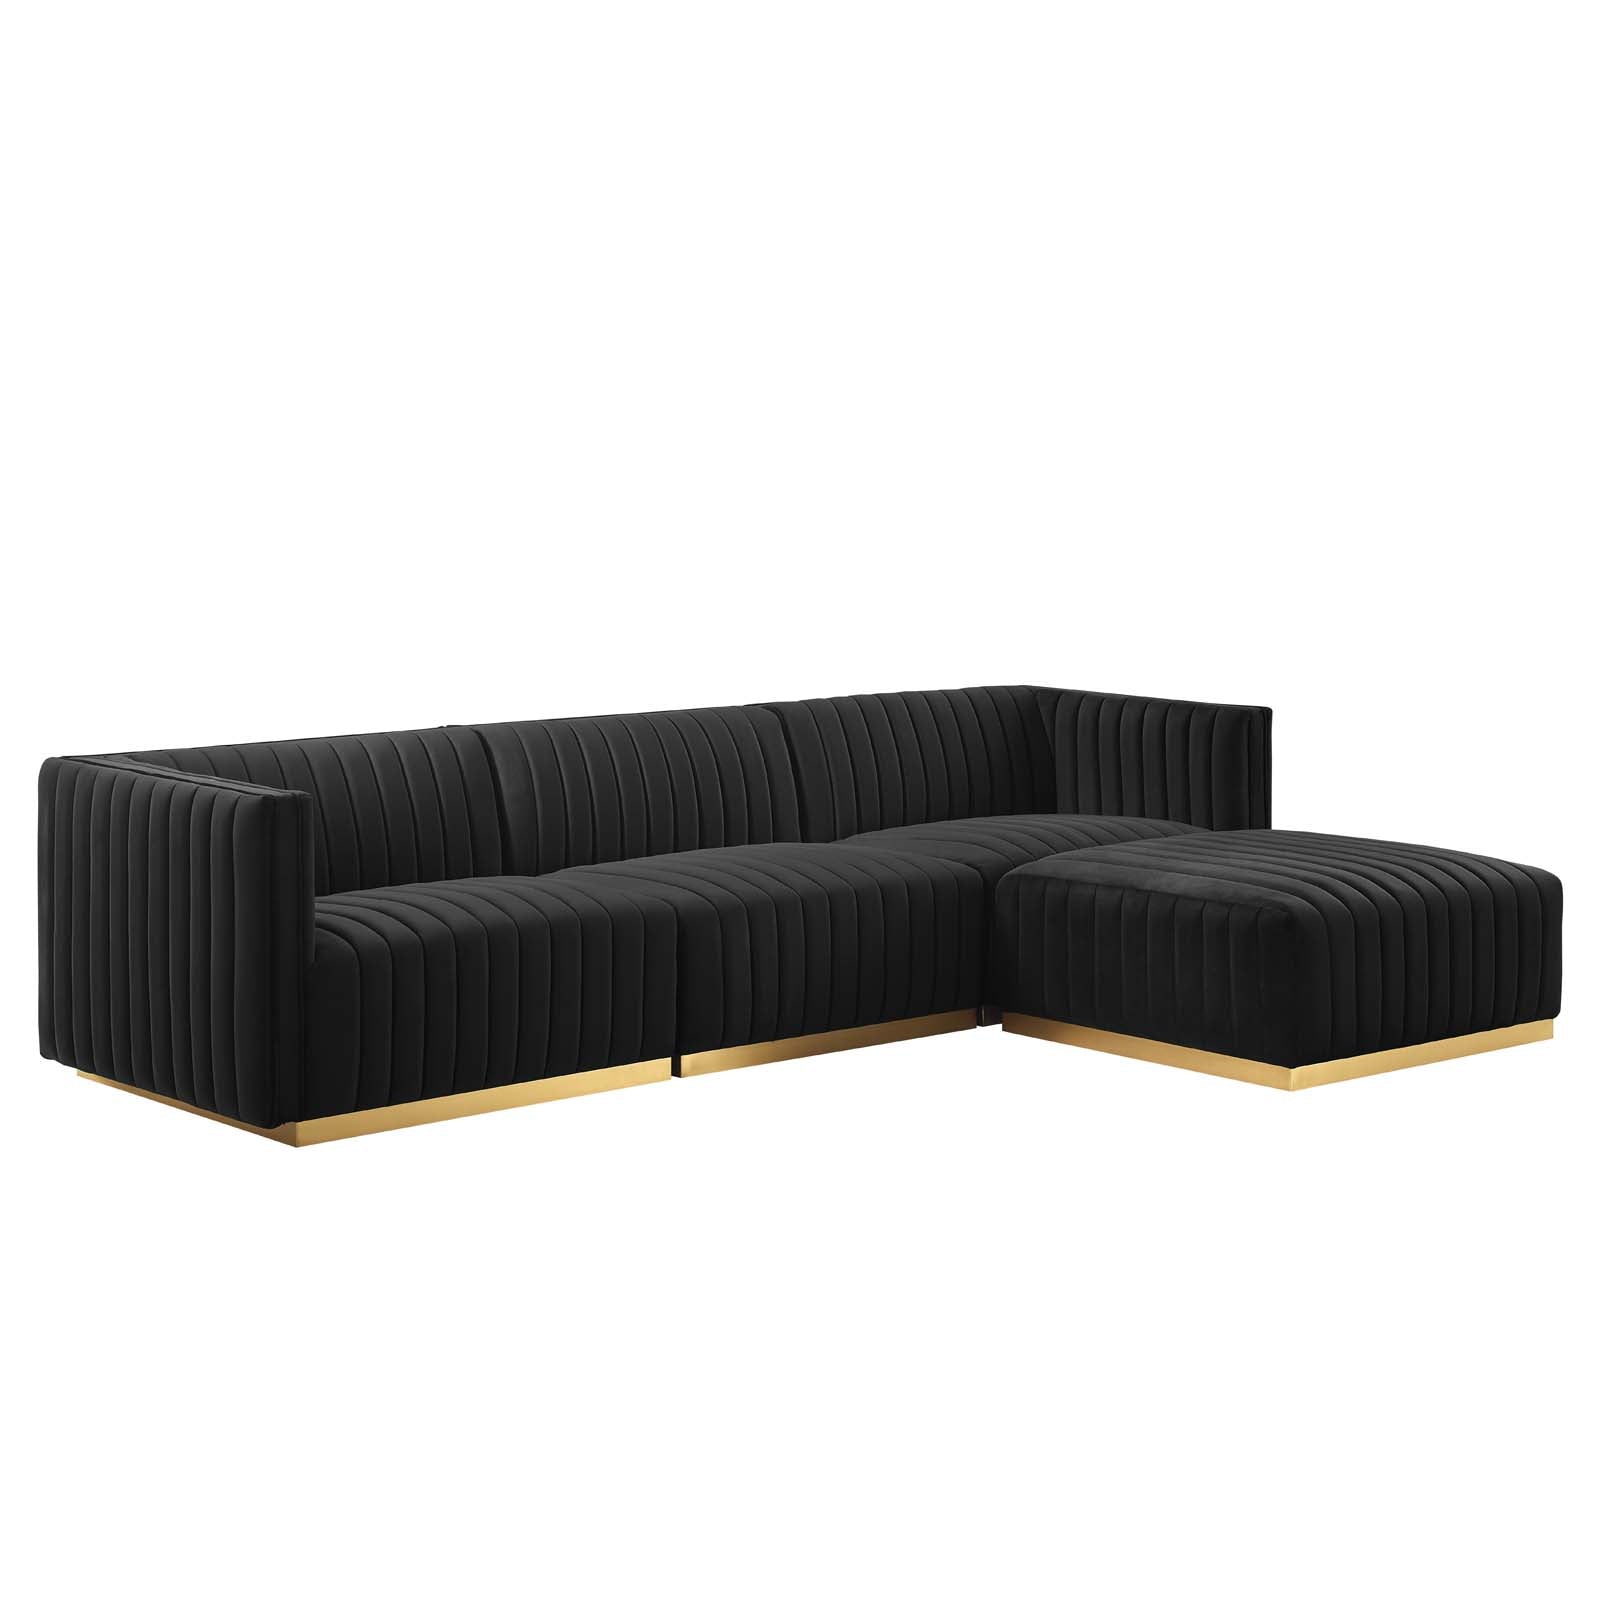 Conjure Channel Tufted Performance Velvet 4-Piece Sectional - East Shore Modern Home Furnishings